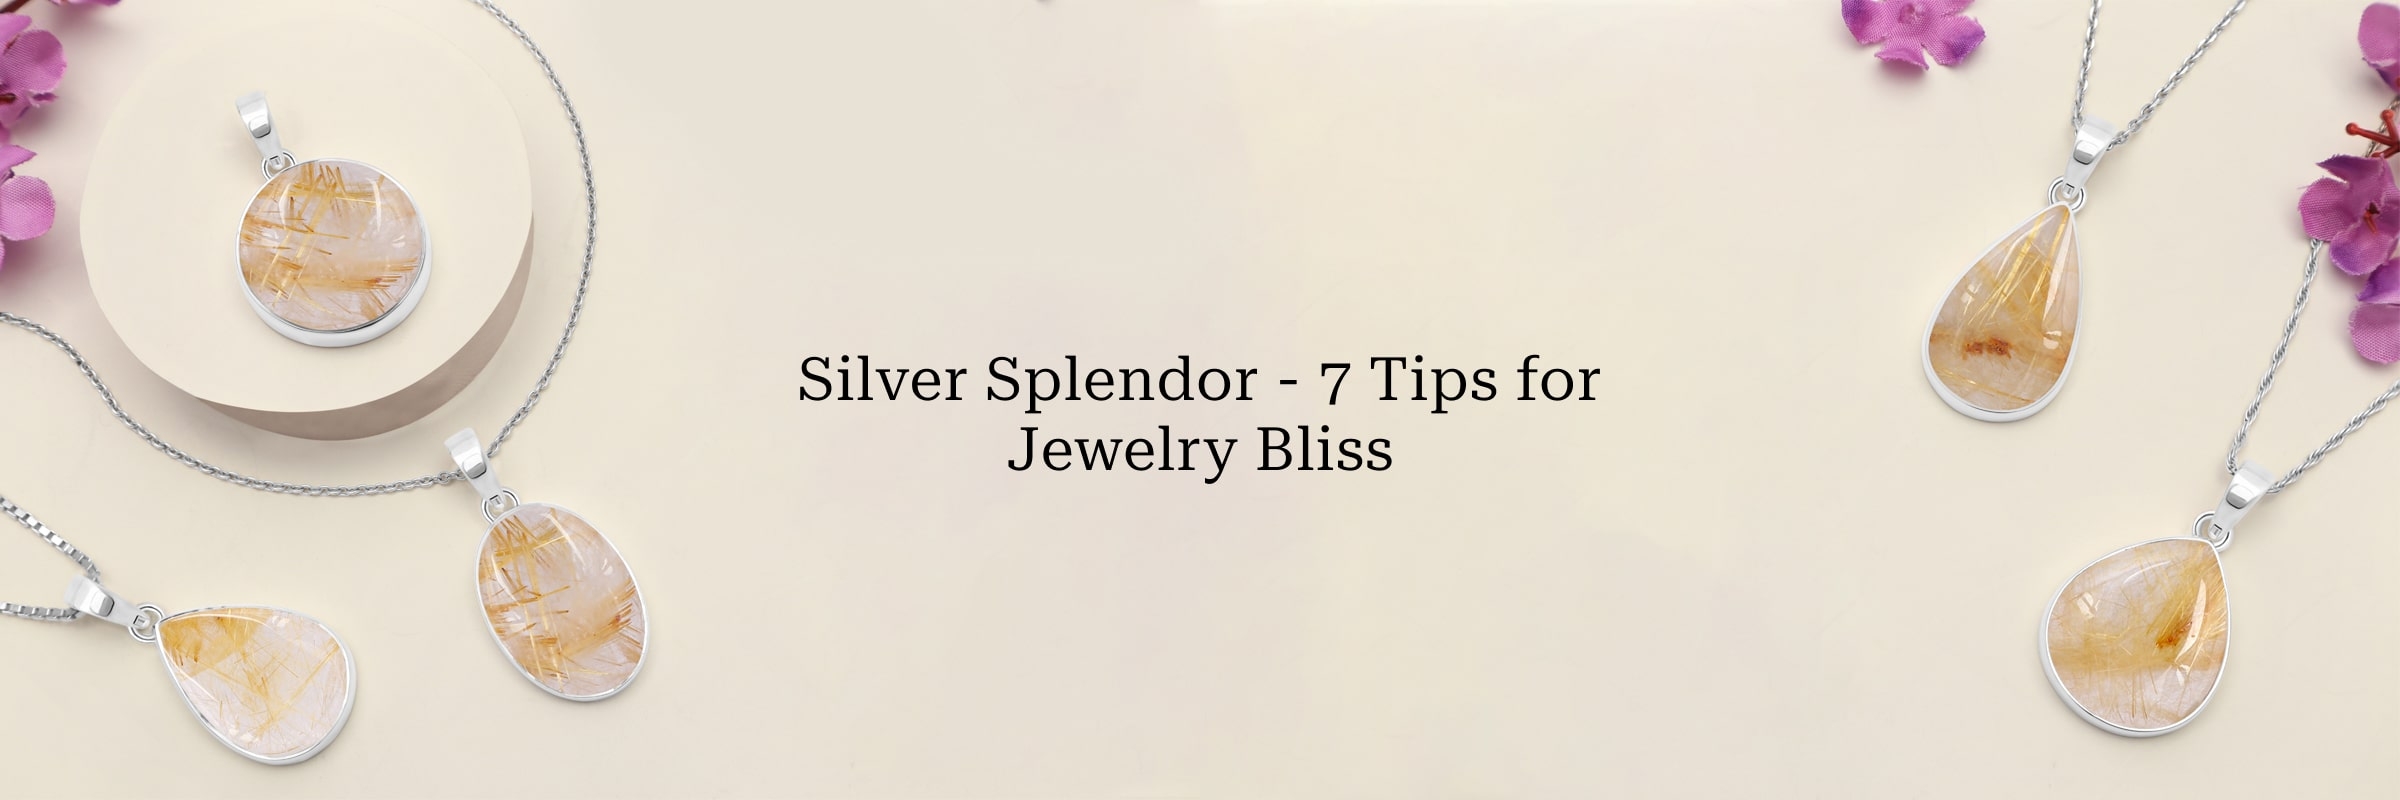 7 Things to Consider When Buying a Silver Jewellery